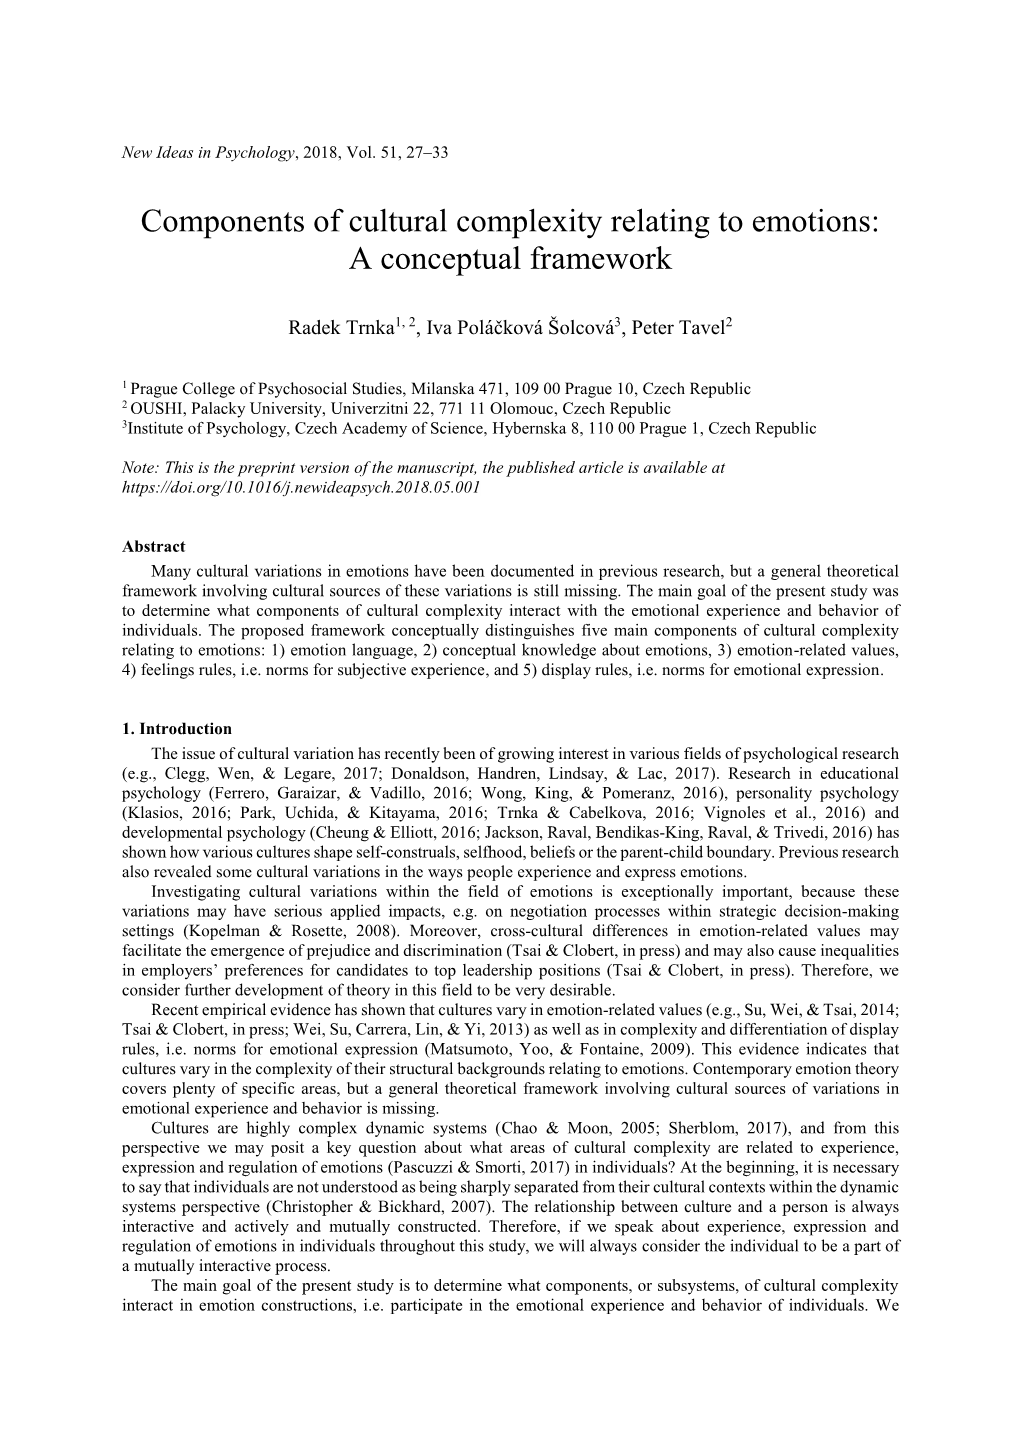 Components of Cultural Complexity Relating to Emotions: a Conceptual Framework